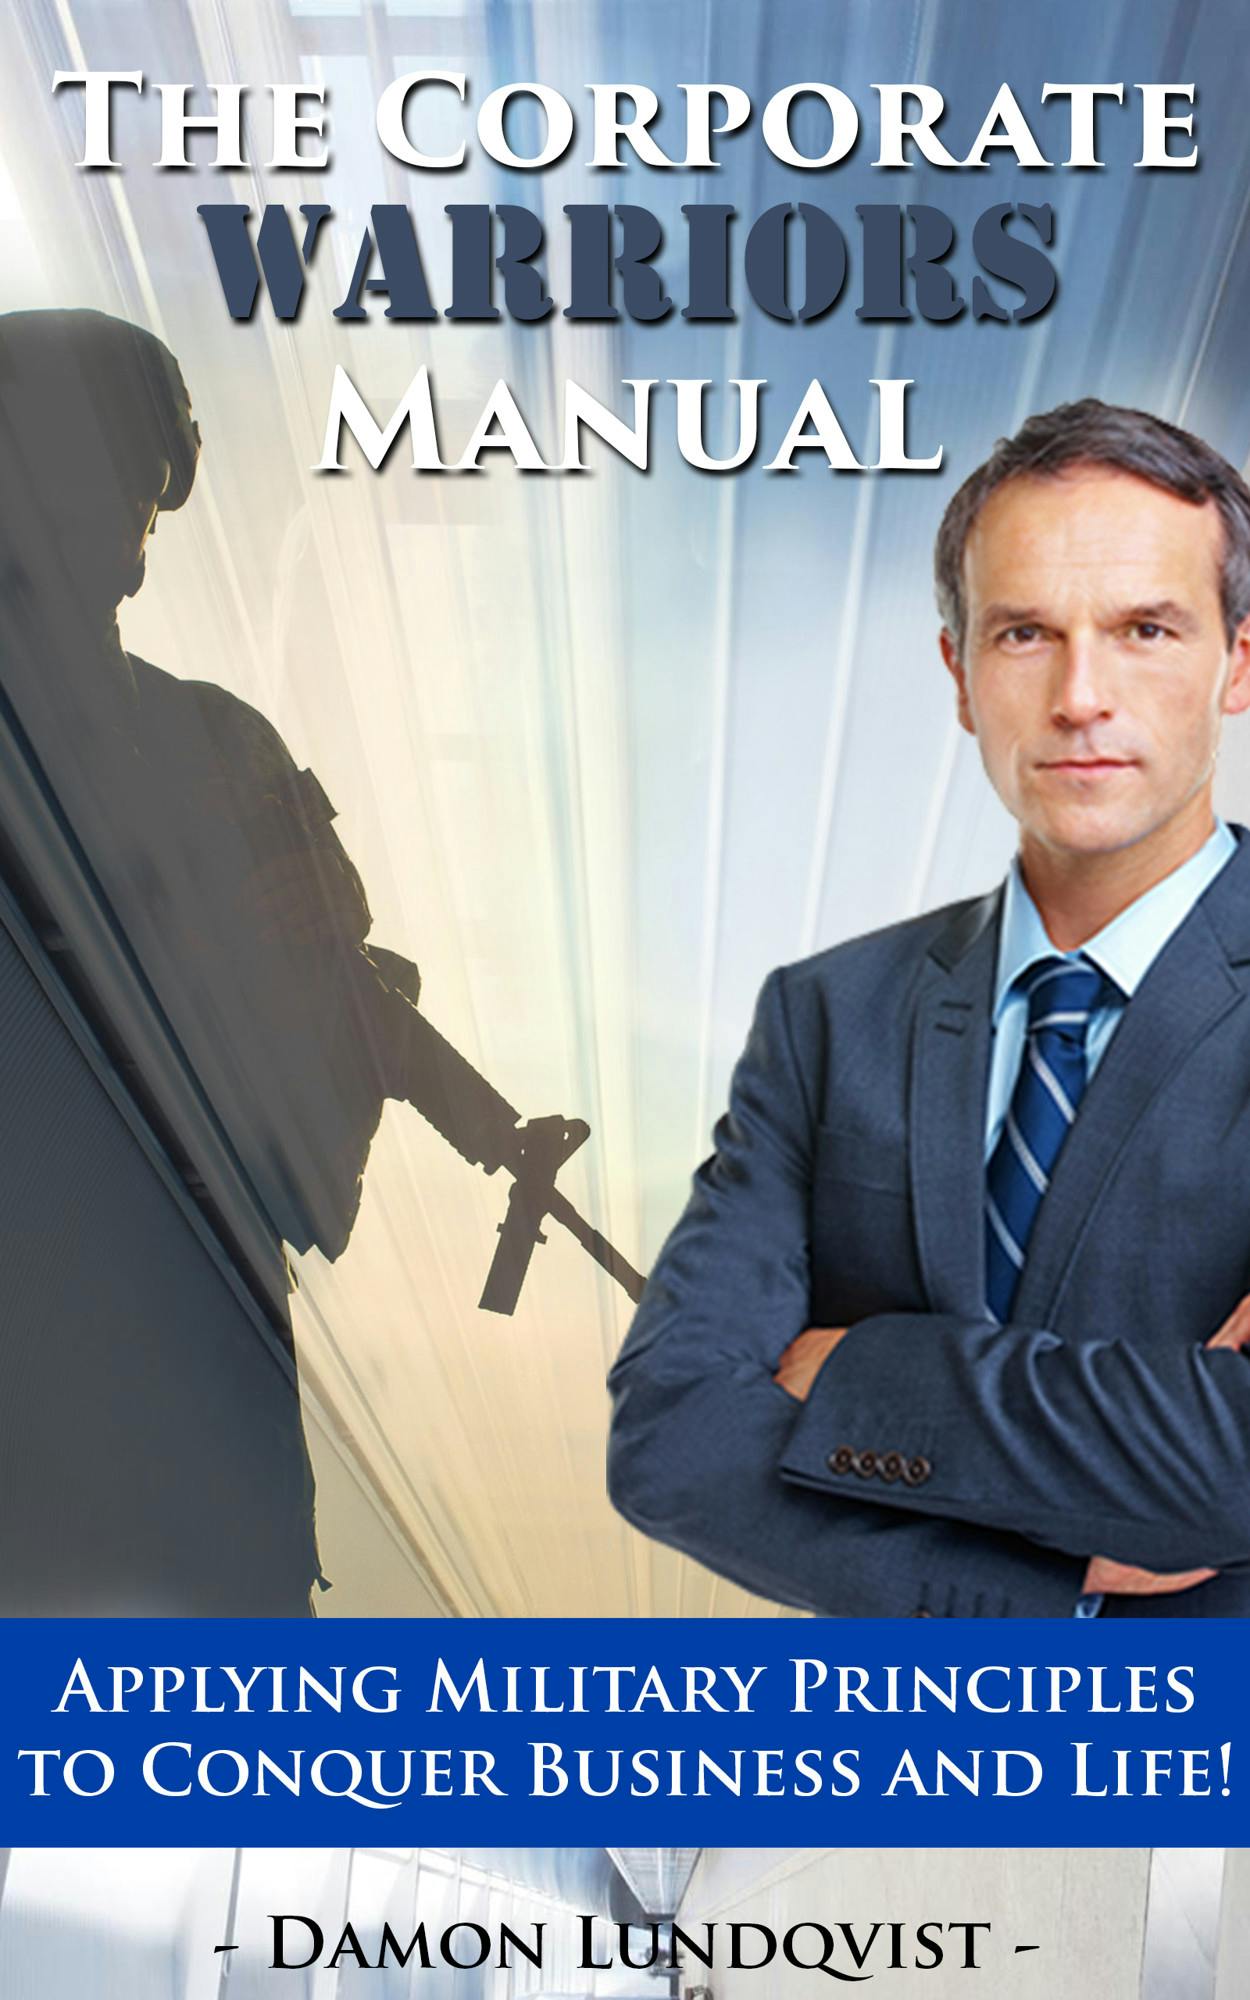 The Corporate Warriors Manual - undefined